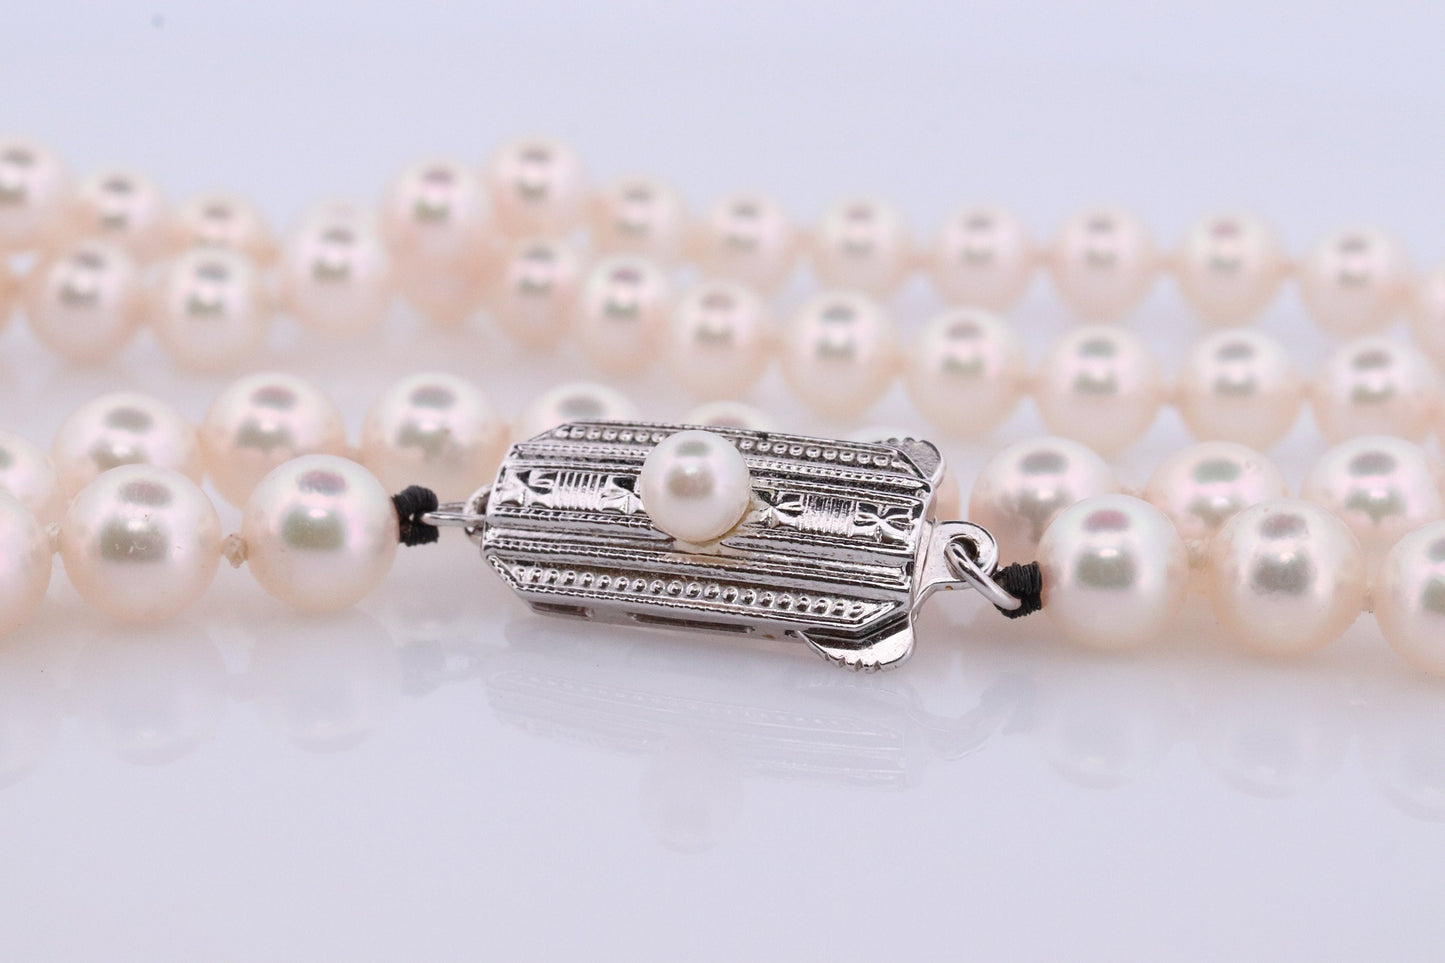 MIKIMOTO Sterling Silver Pearl Necklace. 6mm Pearls 20inch Necklace. Genuine Vintage Preowned MIKIMOTO Japanese Akoya Pearls.